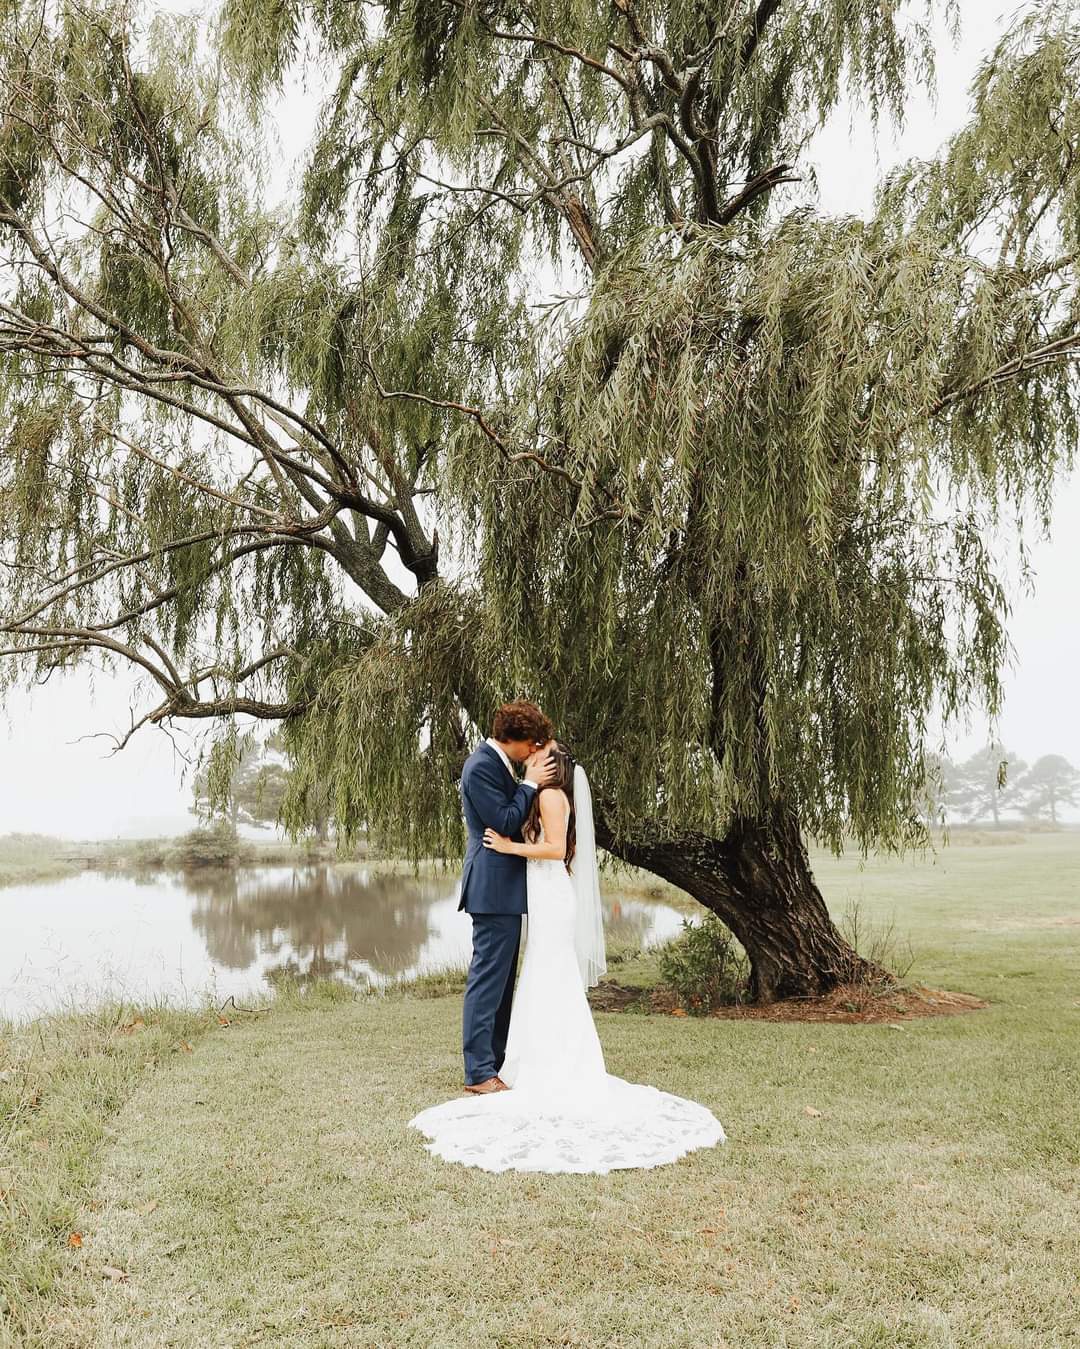 Bride and groom kissing under a weeping willow tree